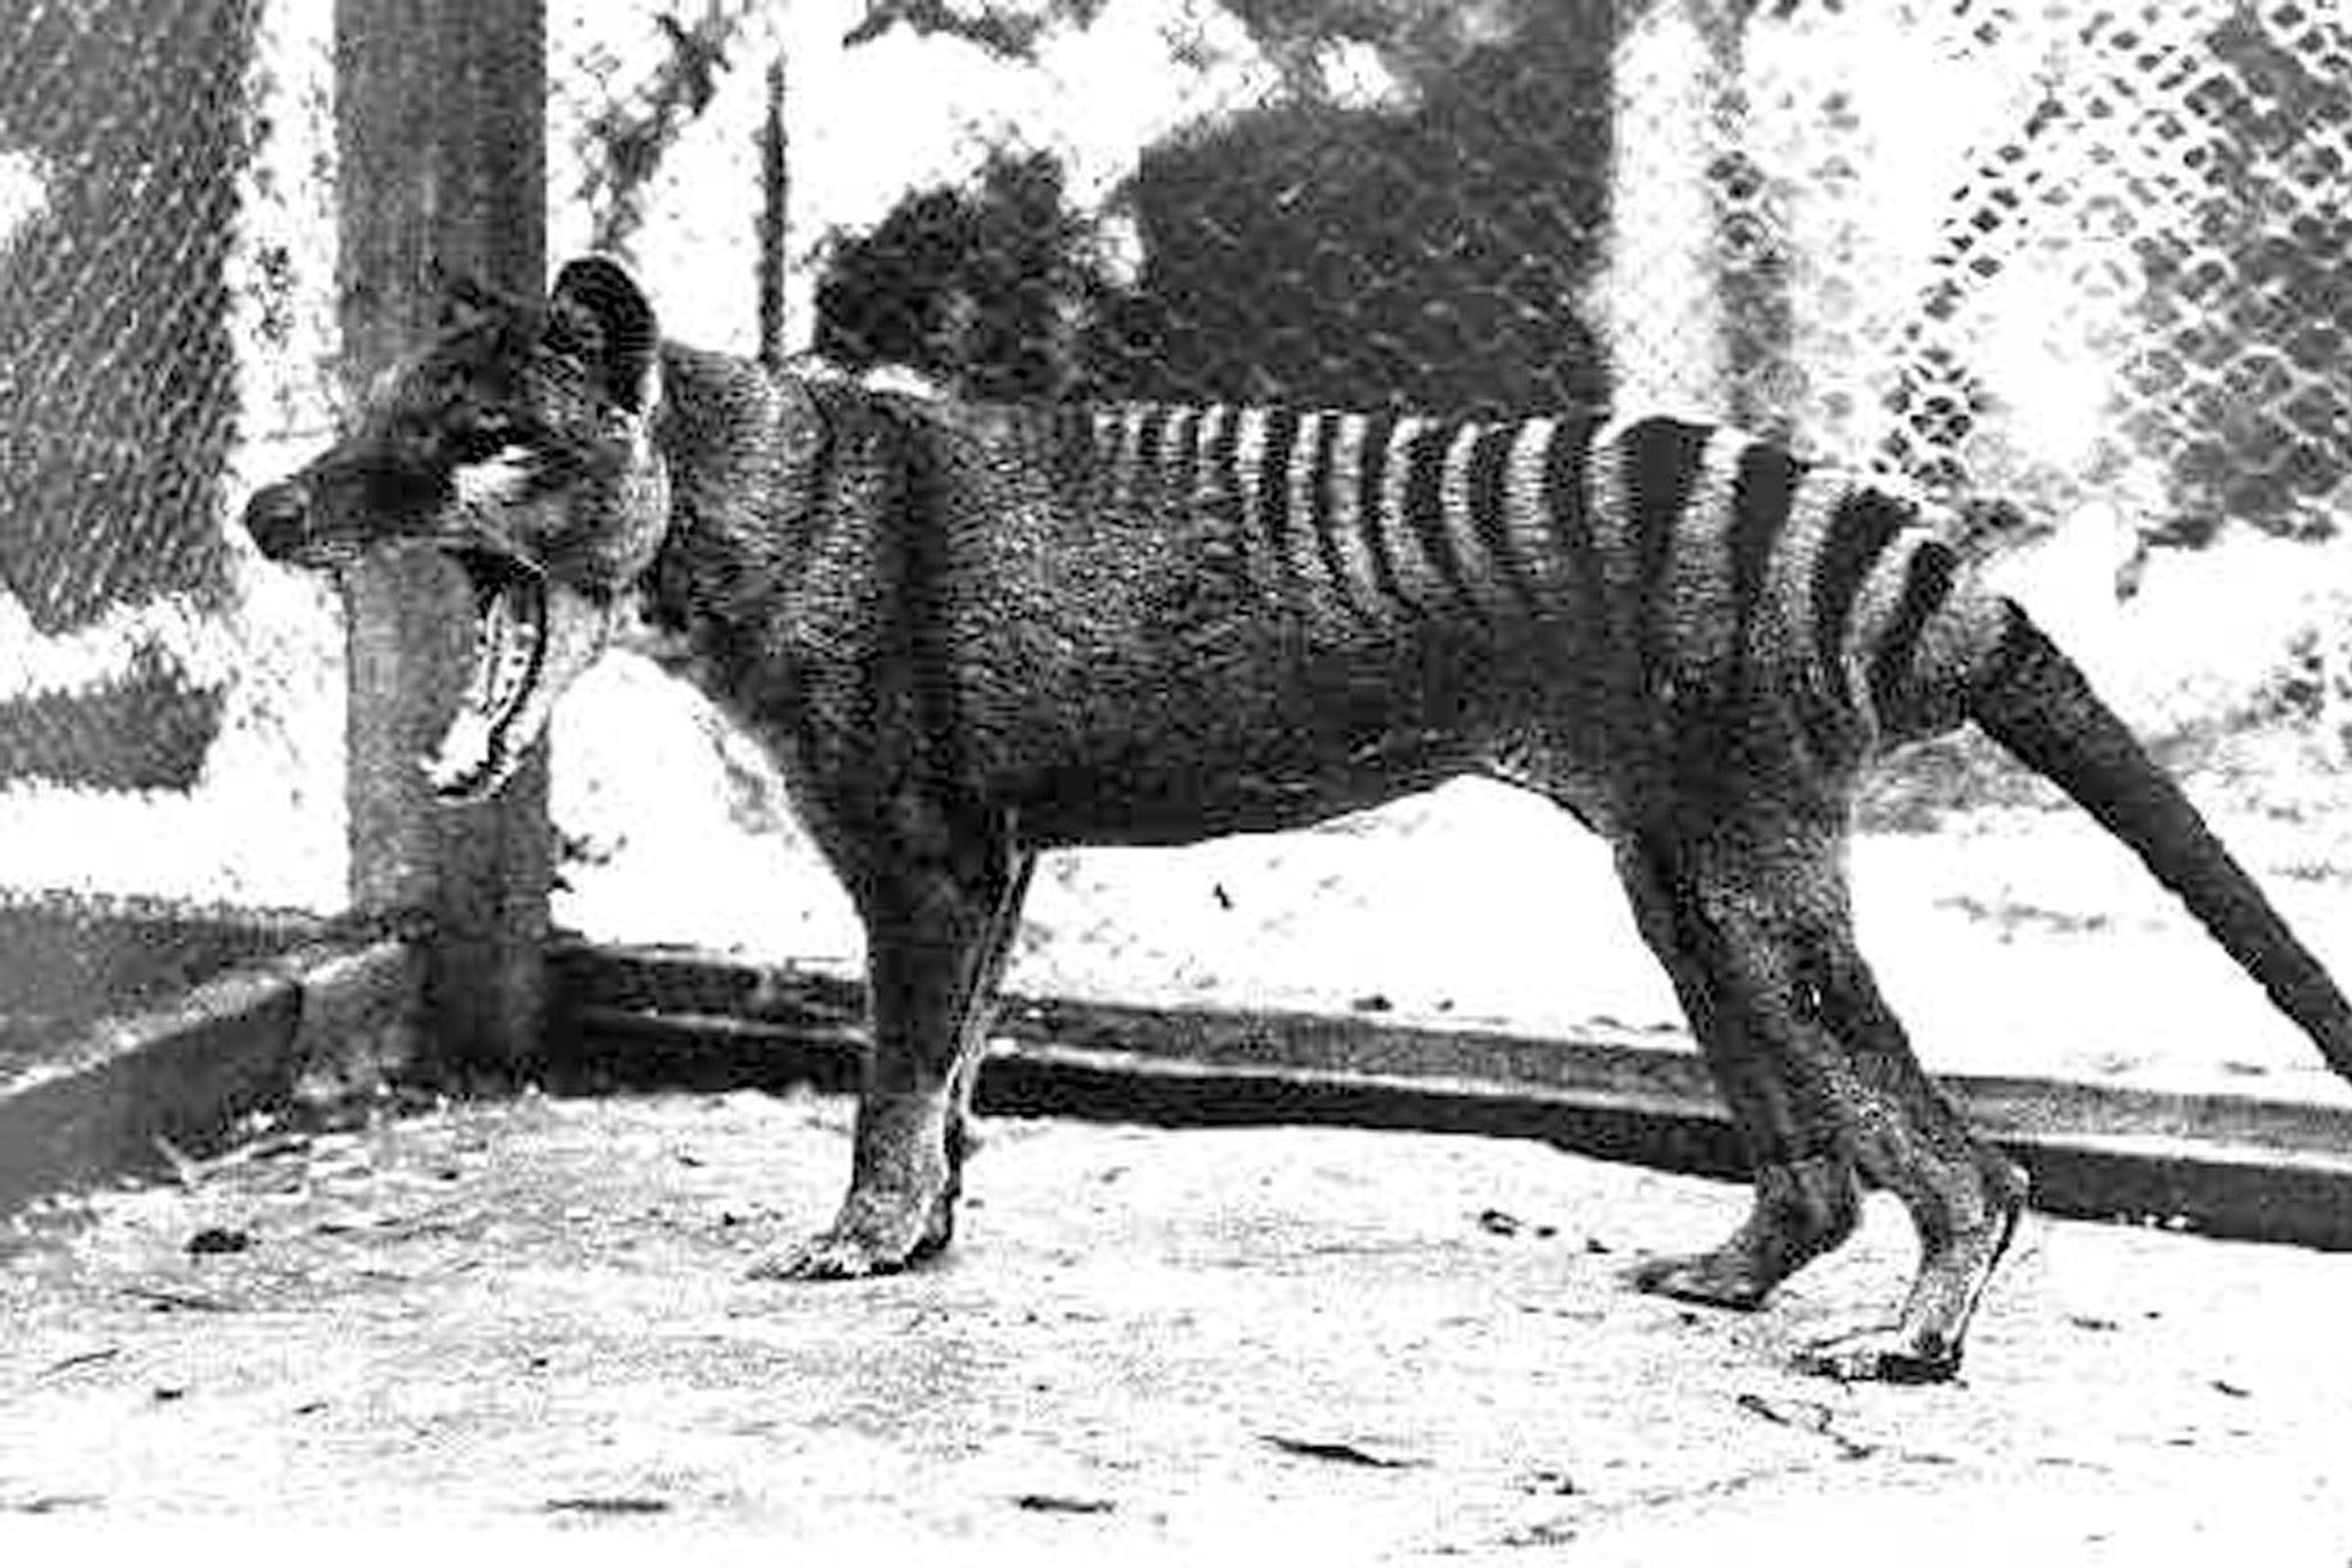 A black-and-white image of a Tasmanian tiger, a four legged animal with a face similar to a dog and strips from its mid back to its tail. Its mouth is open in a yawn or growl.